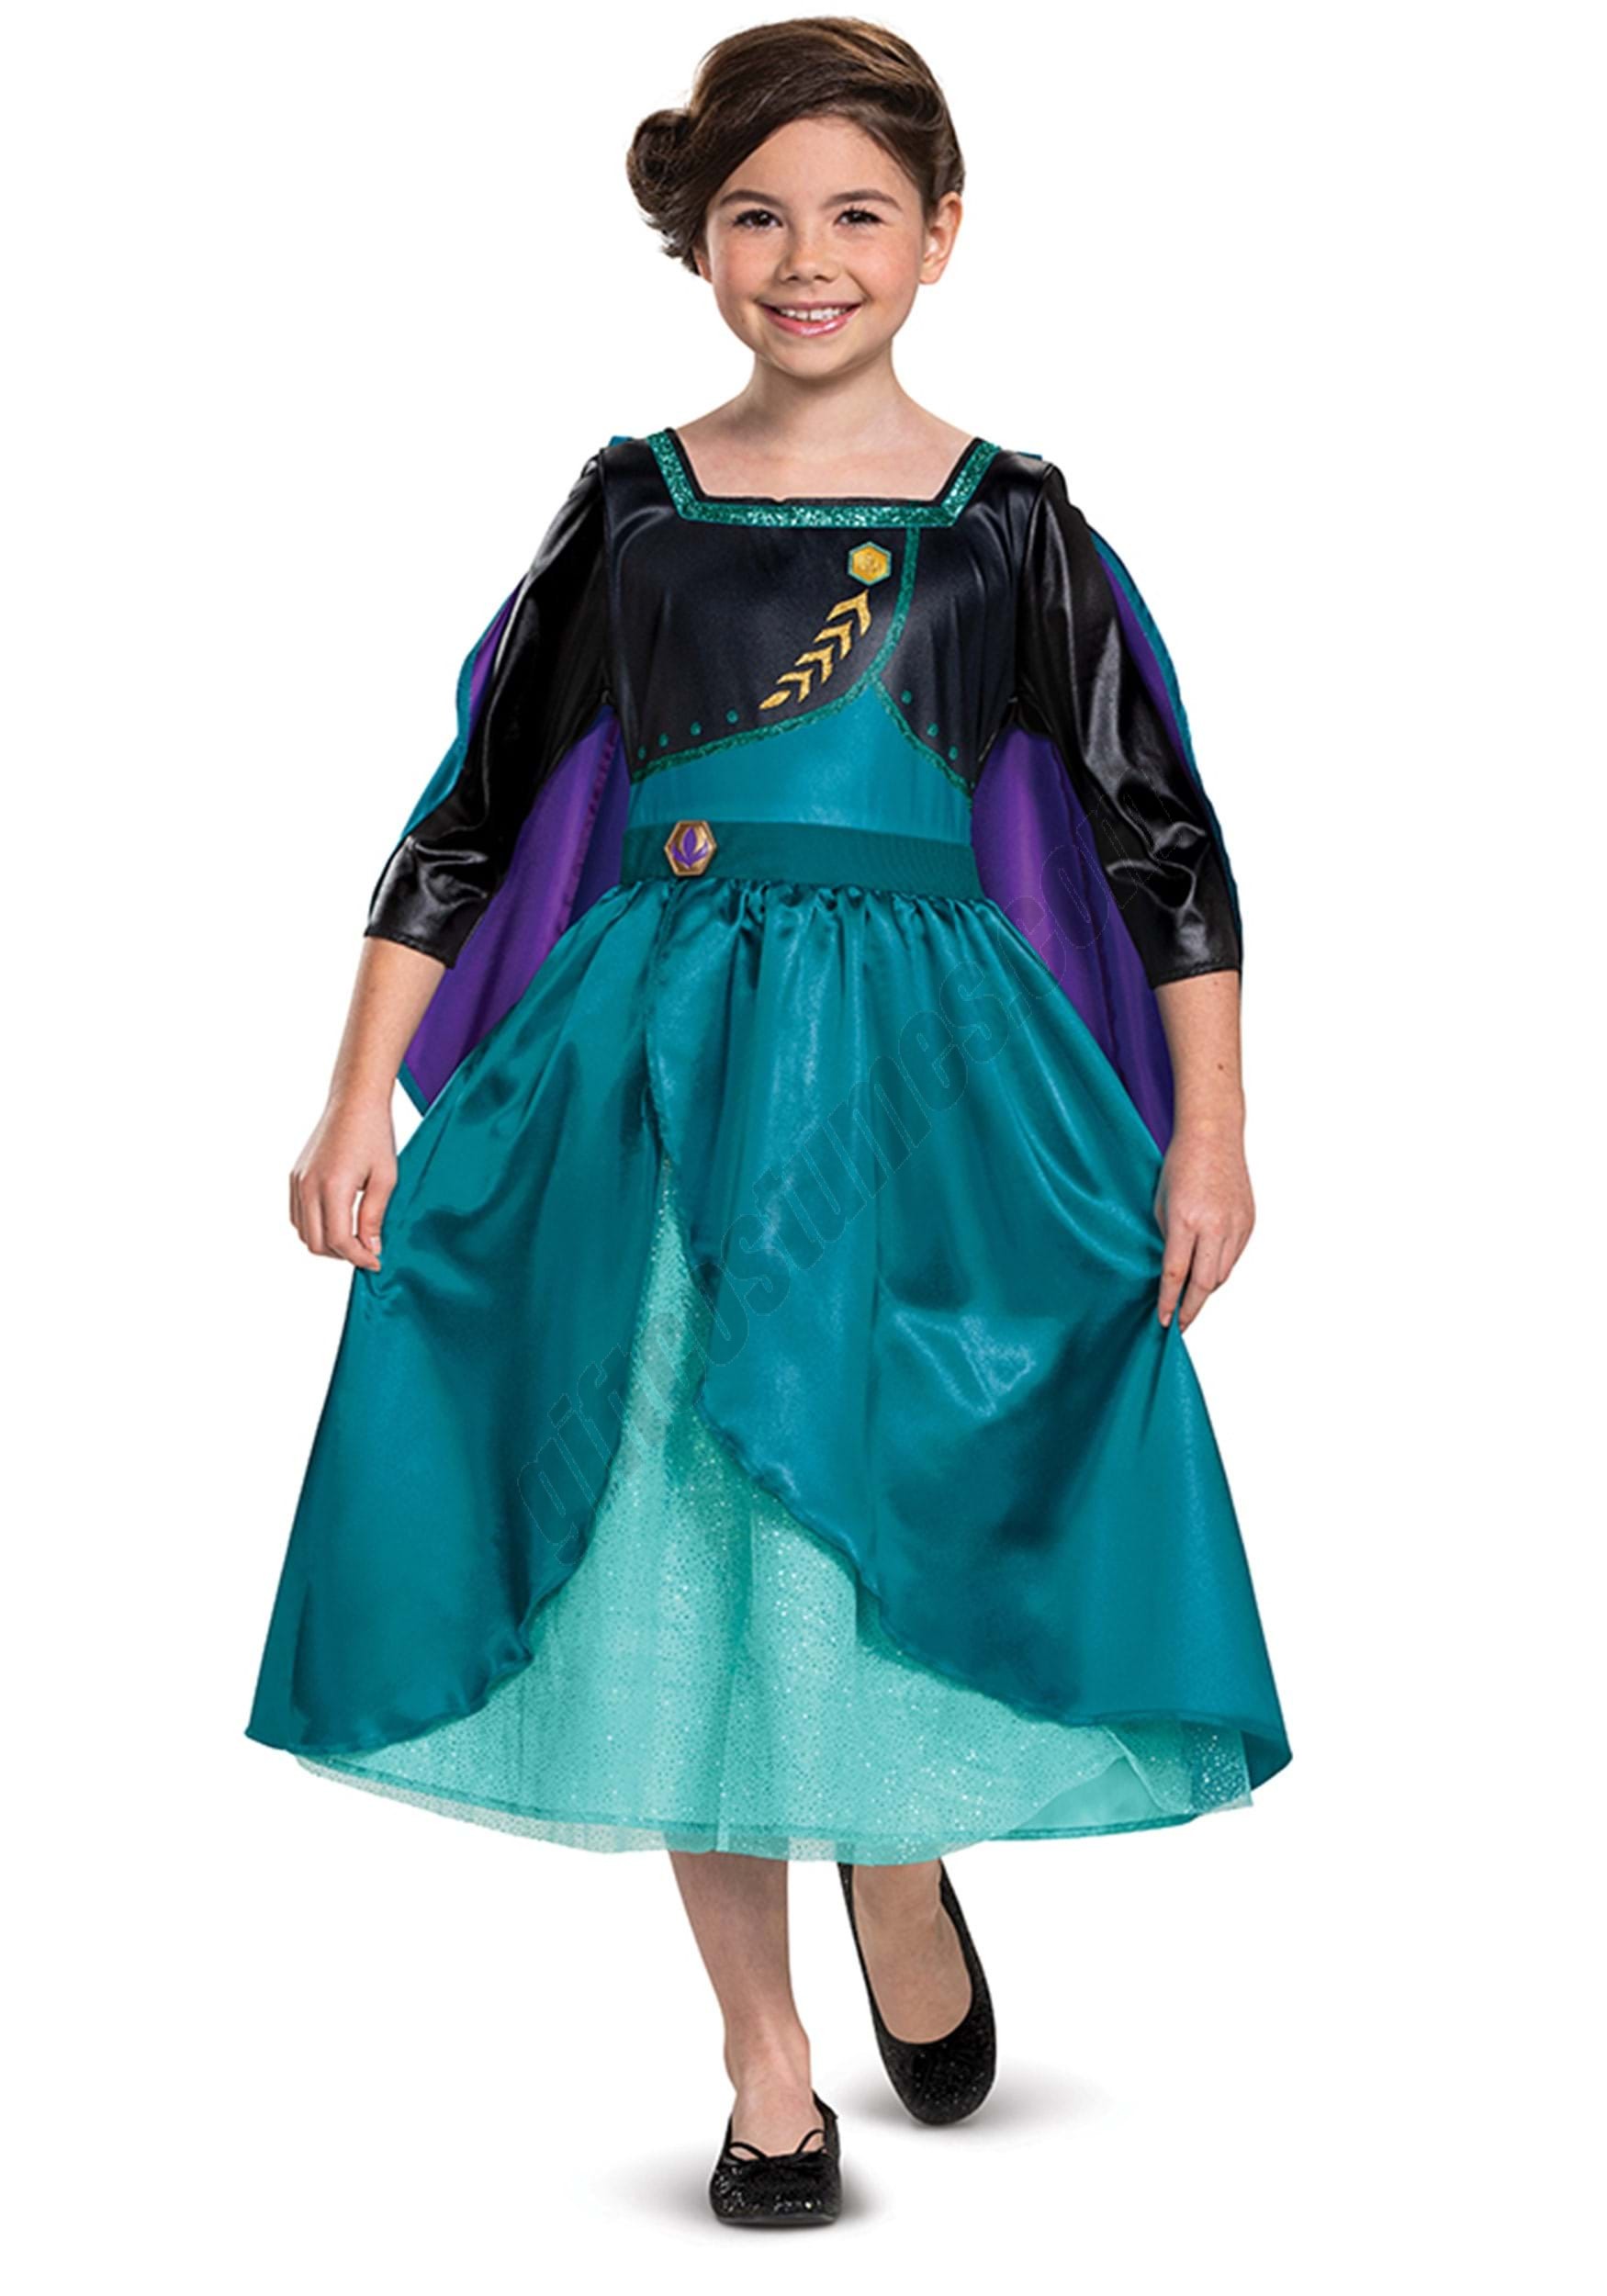 Frozen Queen Anna Classic Costume for Kids Promotions - Frozen Queen Anna Classic Costume for Kids Promotions